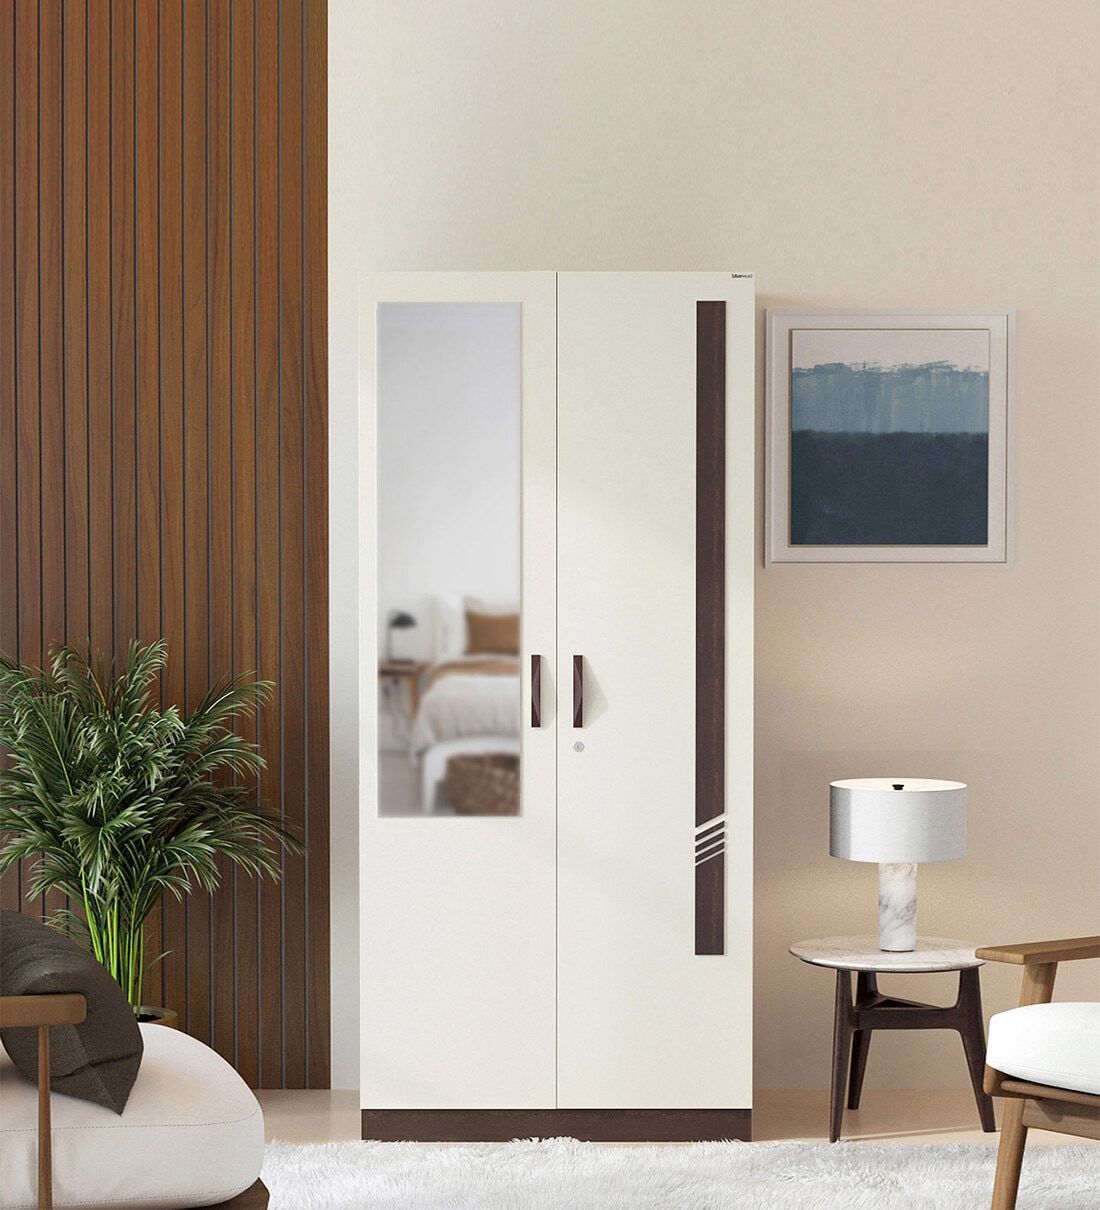 Buy Andrie 2 Door Wardrobe In Wenge & White Finish With Mirror At 26% Off Bluewud | Pepperfry Regarding Single White Wardrobes With Mirror (View 11 of 15)